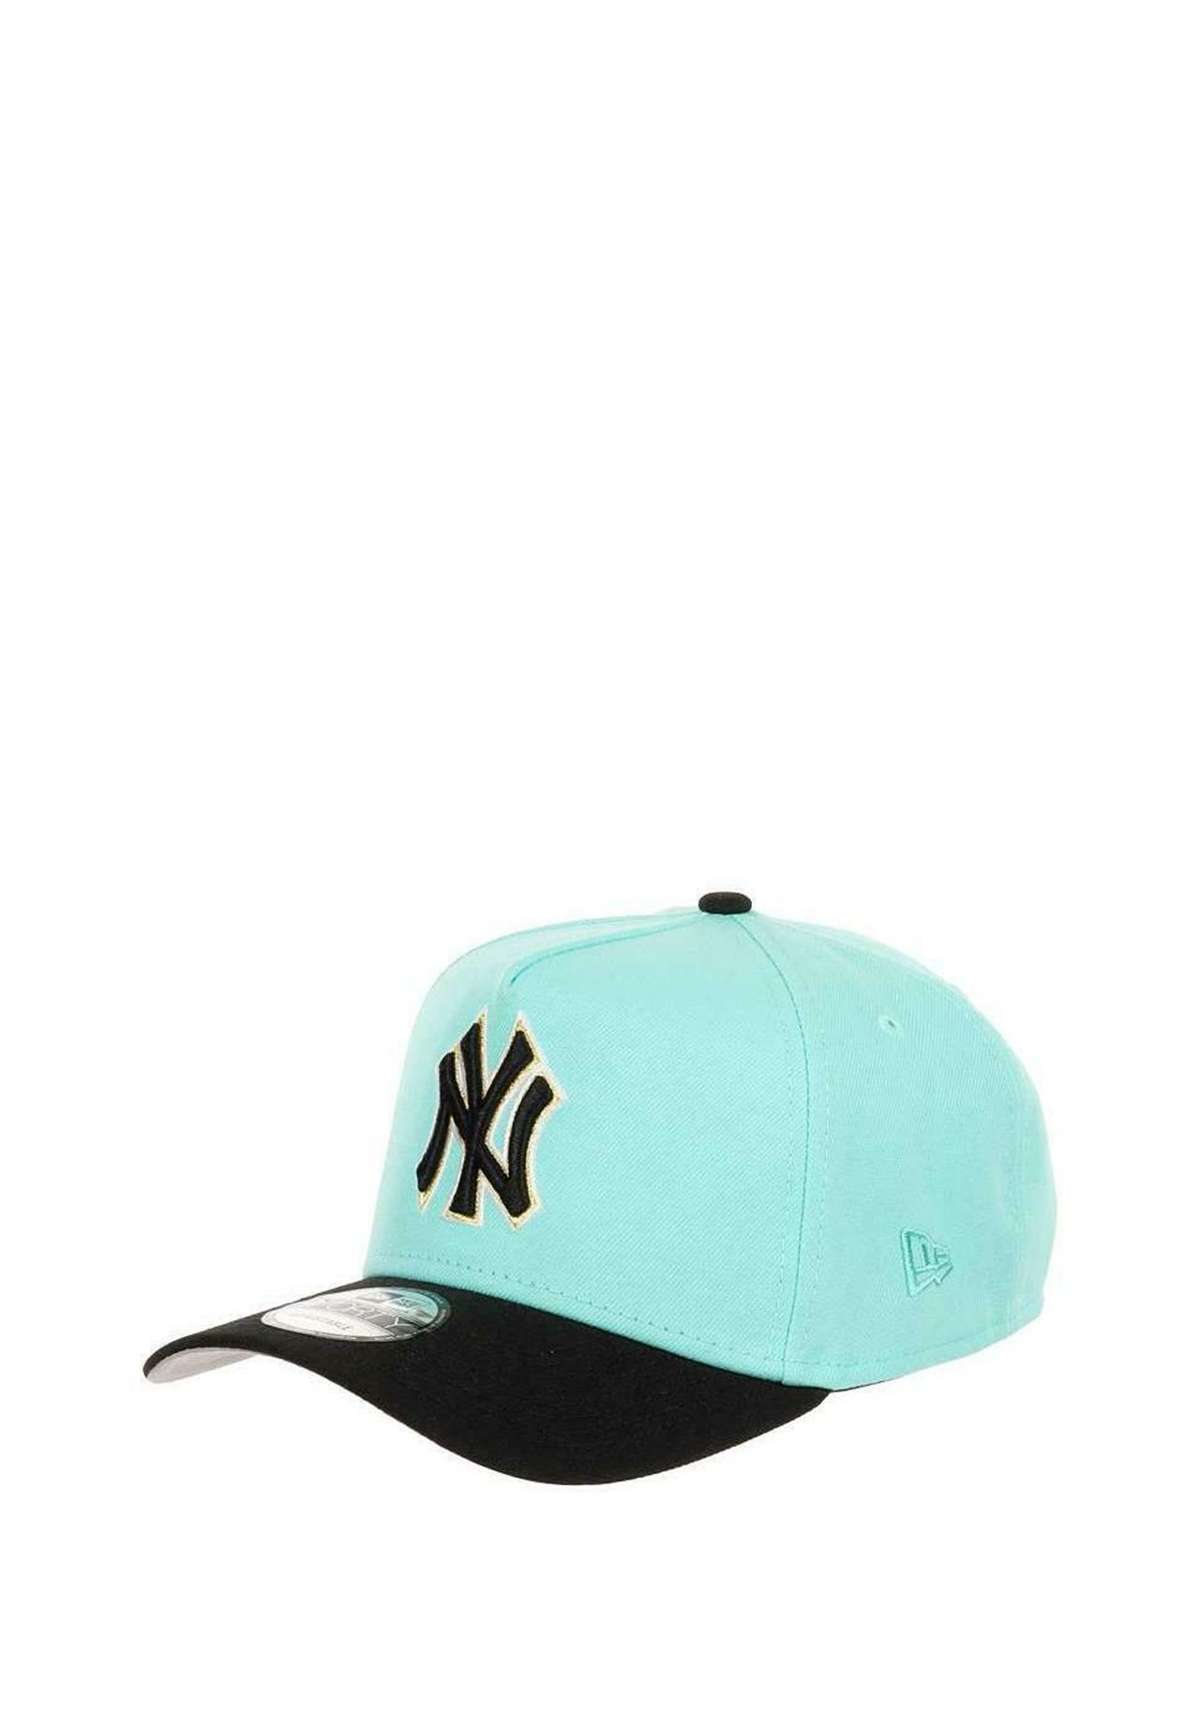 Кепка NEW YORK YANKEES MLB YANKEE STADIUM SIDEPATCH COOPERSTOWN 9FORTY A-FRAME SNAPBACK